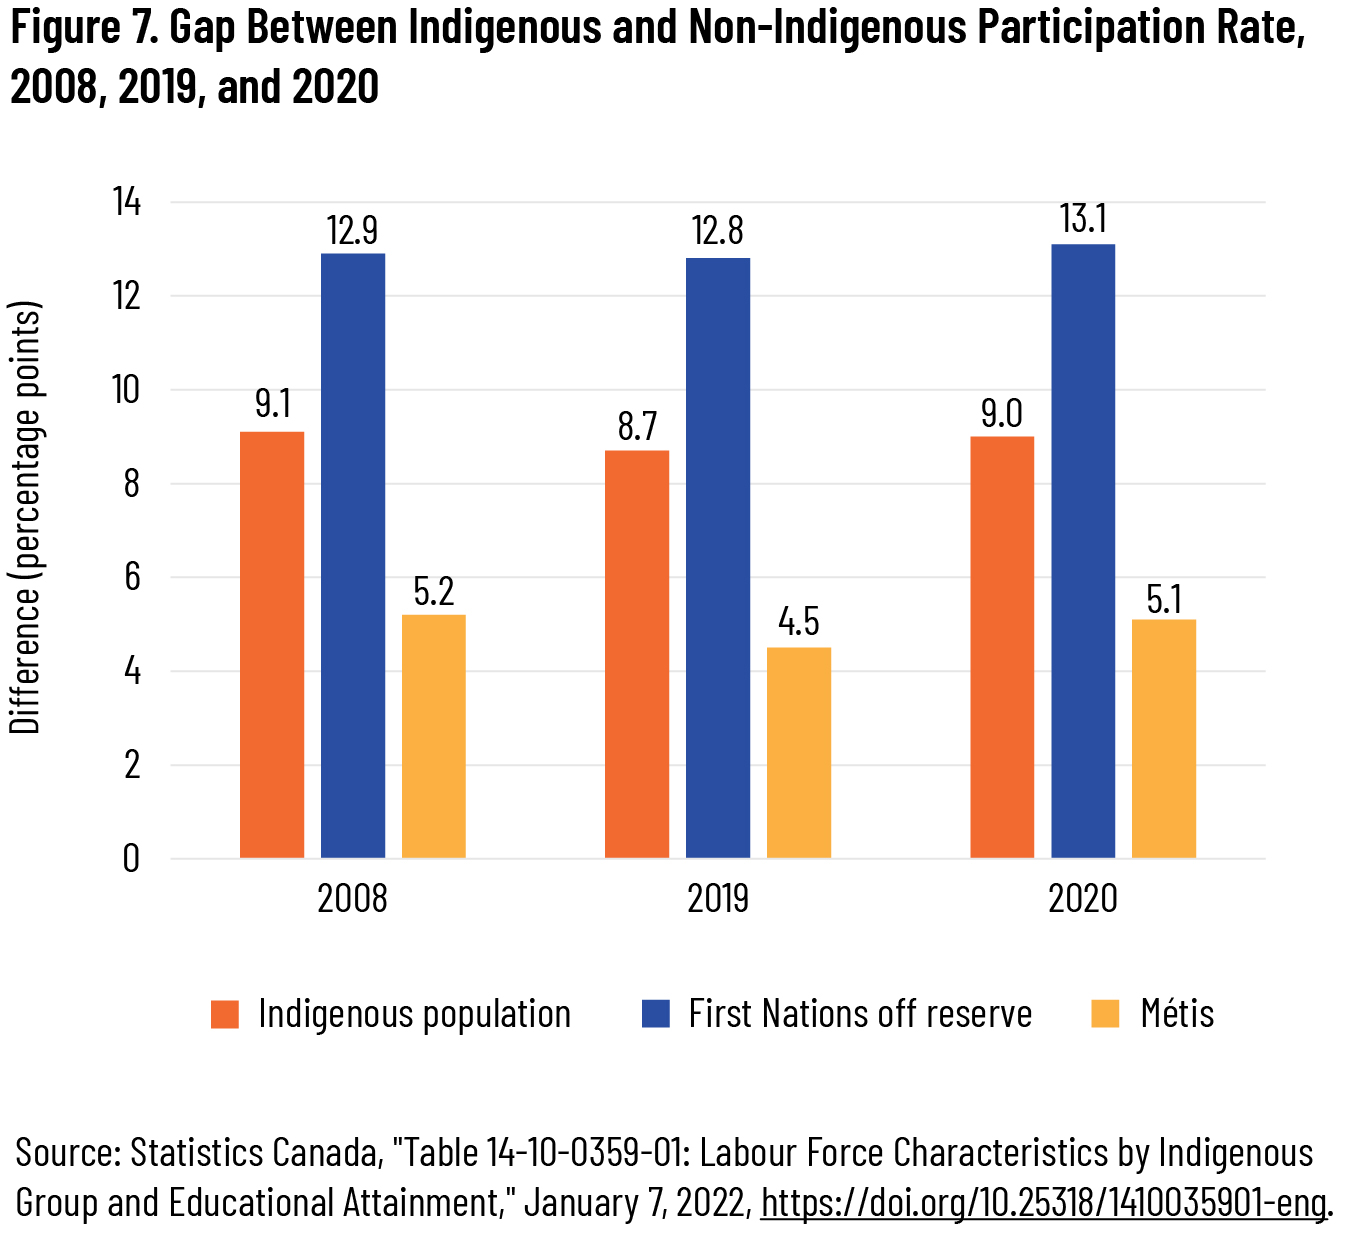 Figure 7. Gap Between Indigenous and Non-Indigenous Participation Rate, 2008, 2019, and 2020